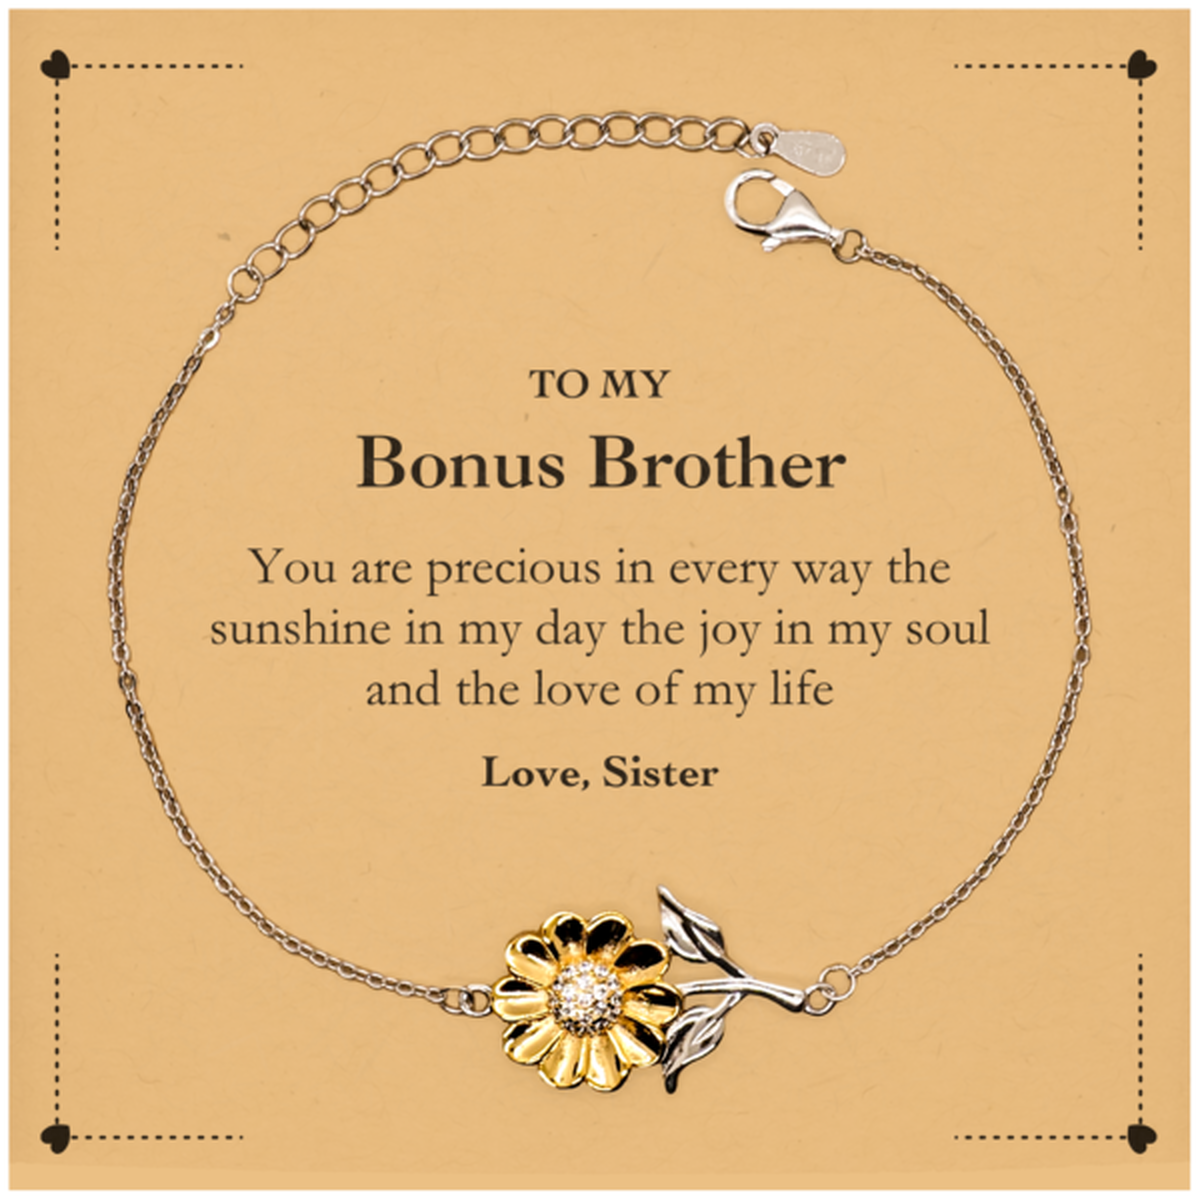 Graduation Gifts for Bonus Brother Sunflower Bracelet Present from Sister, Christmas Bonus Brother Birthday Gifts Bonus Brother You are precious in every way the sunshine in my day. Love, Sister